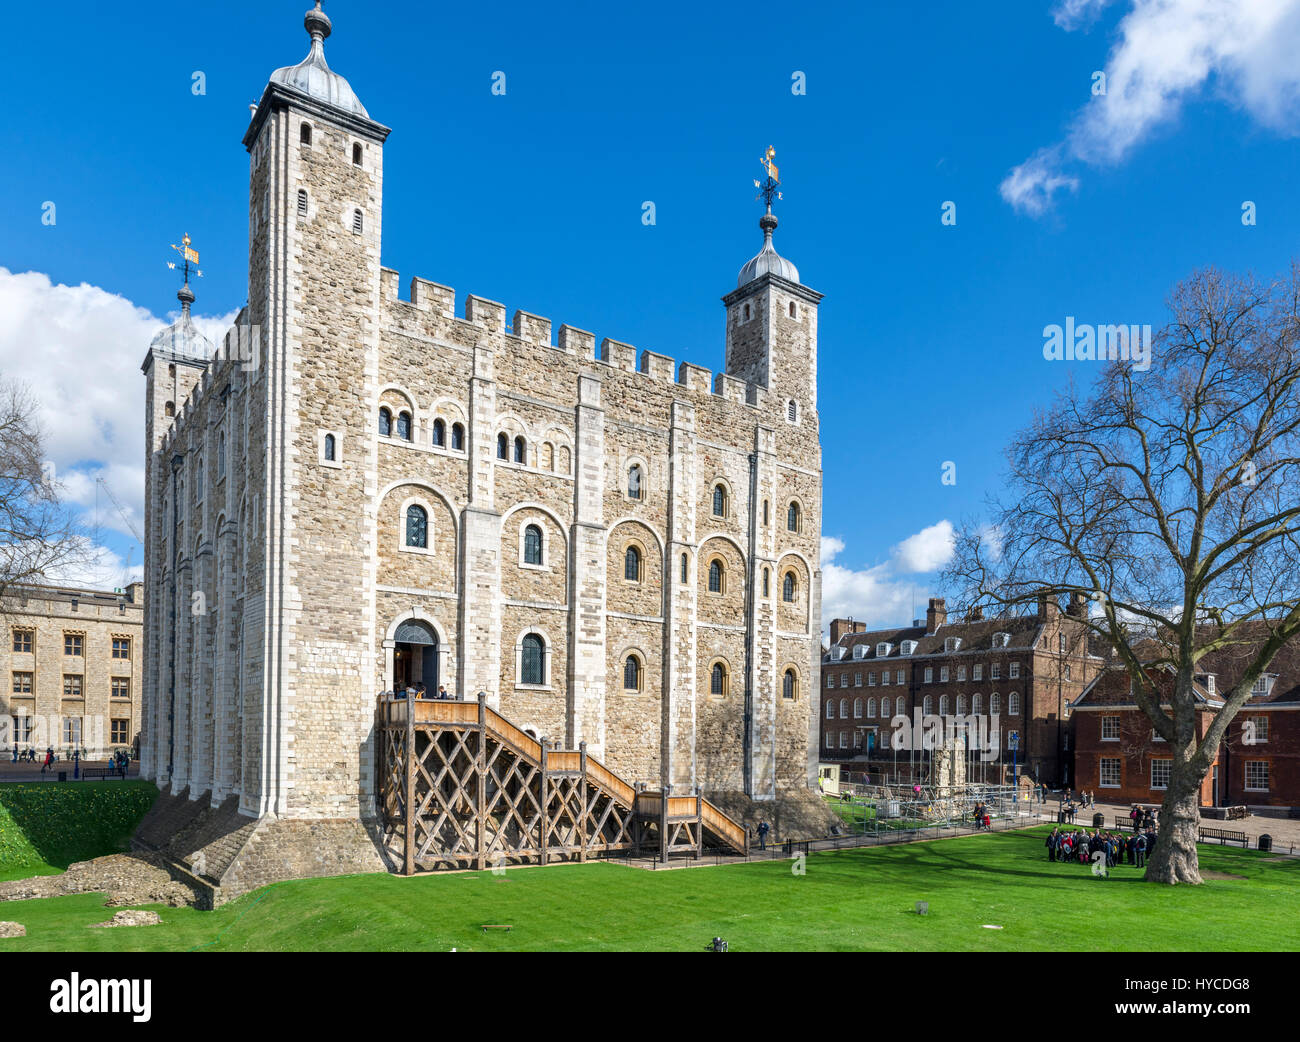 Tower of London. The White Tower, a medieval keep originally built by William the Conqueror in the early 1080s, Tower of London, London, England, UK Stock Photo